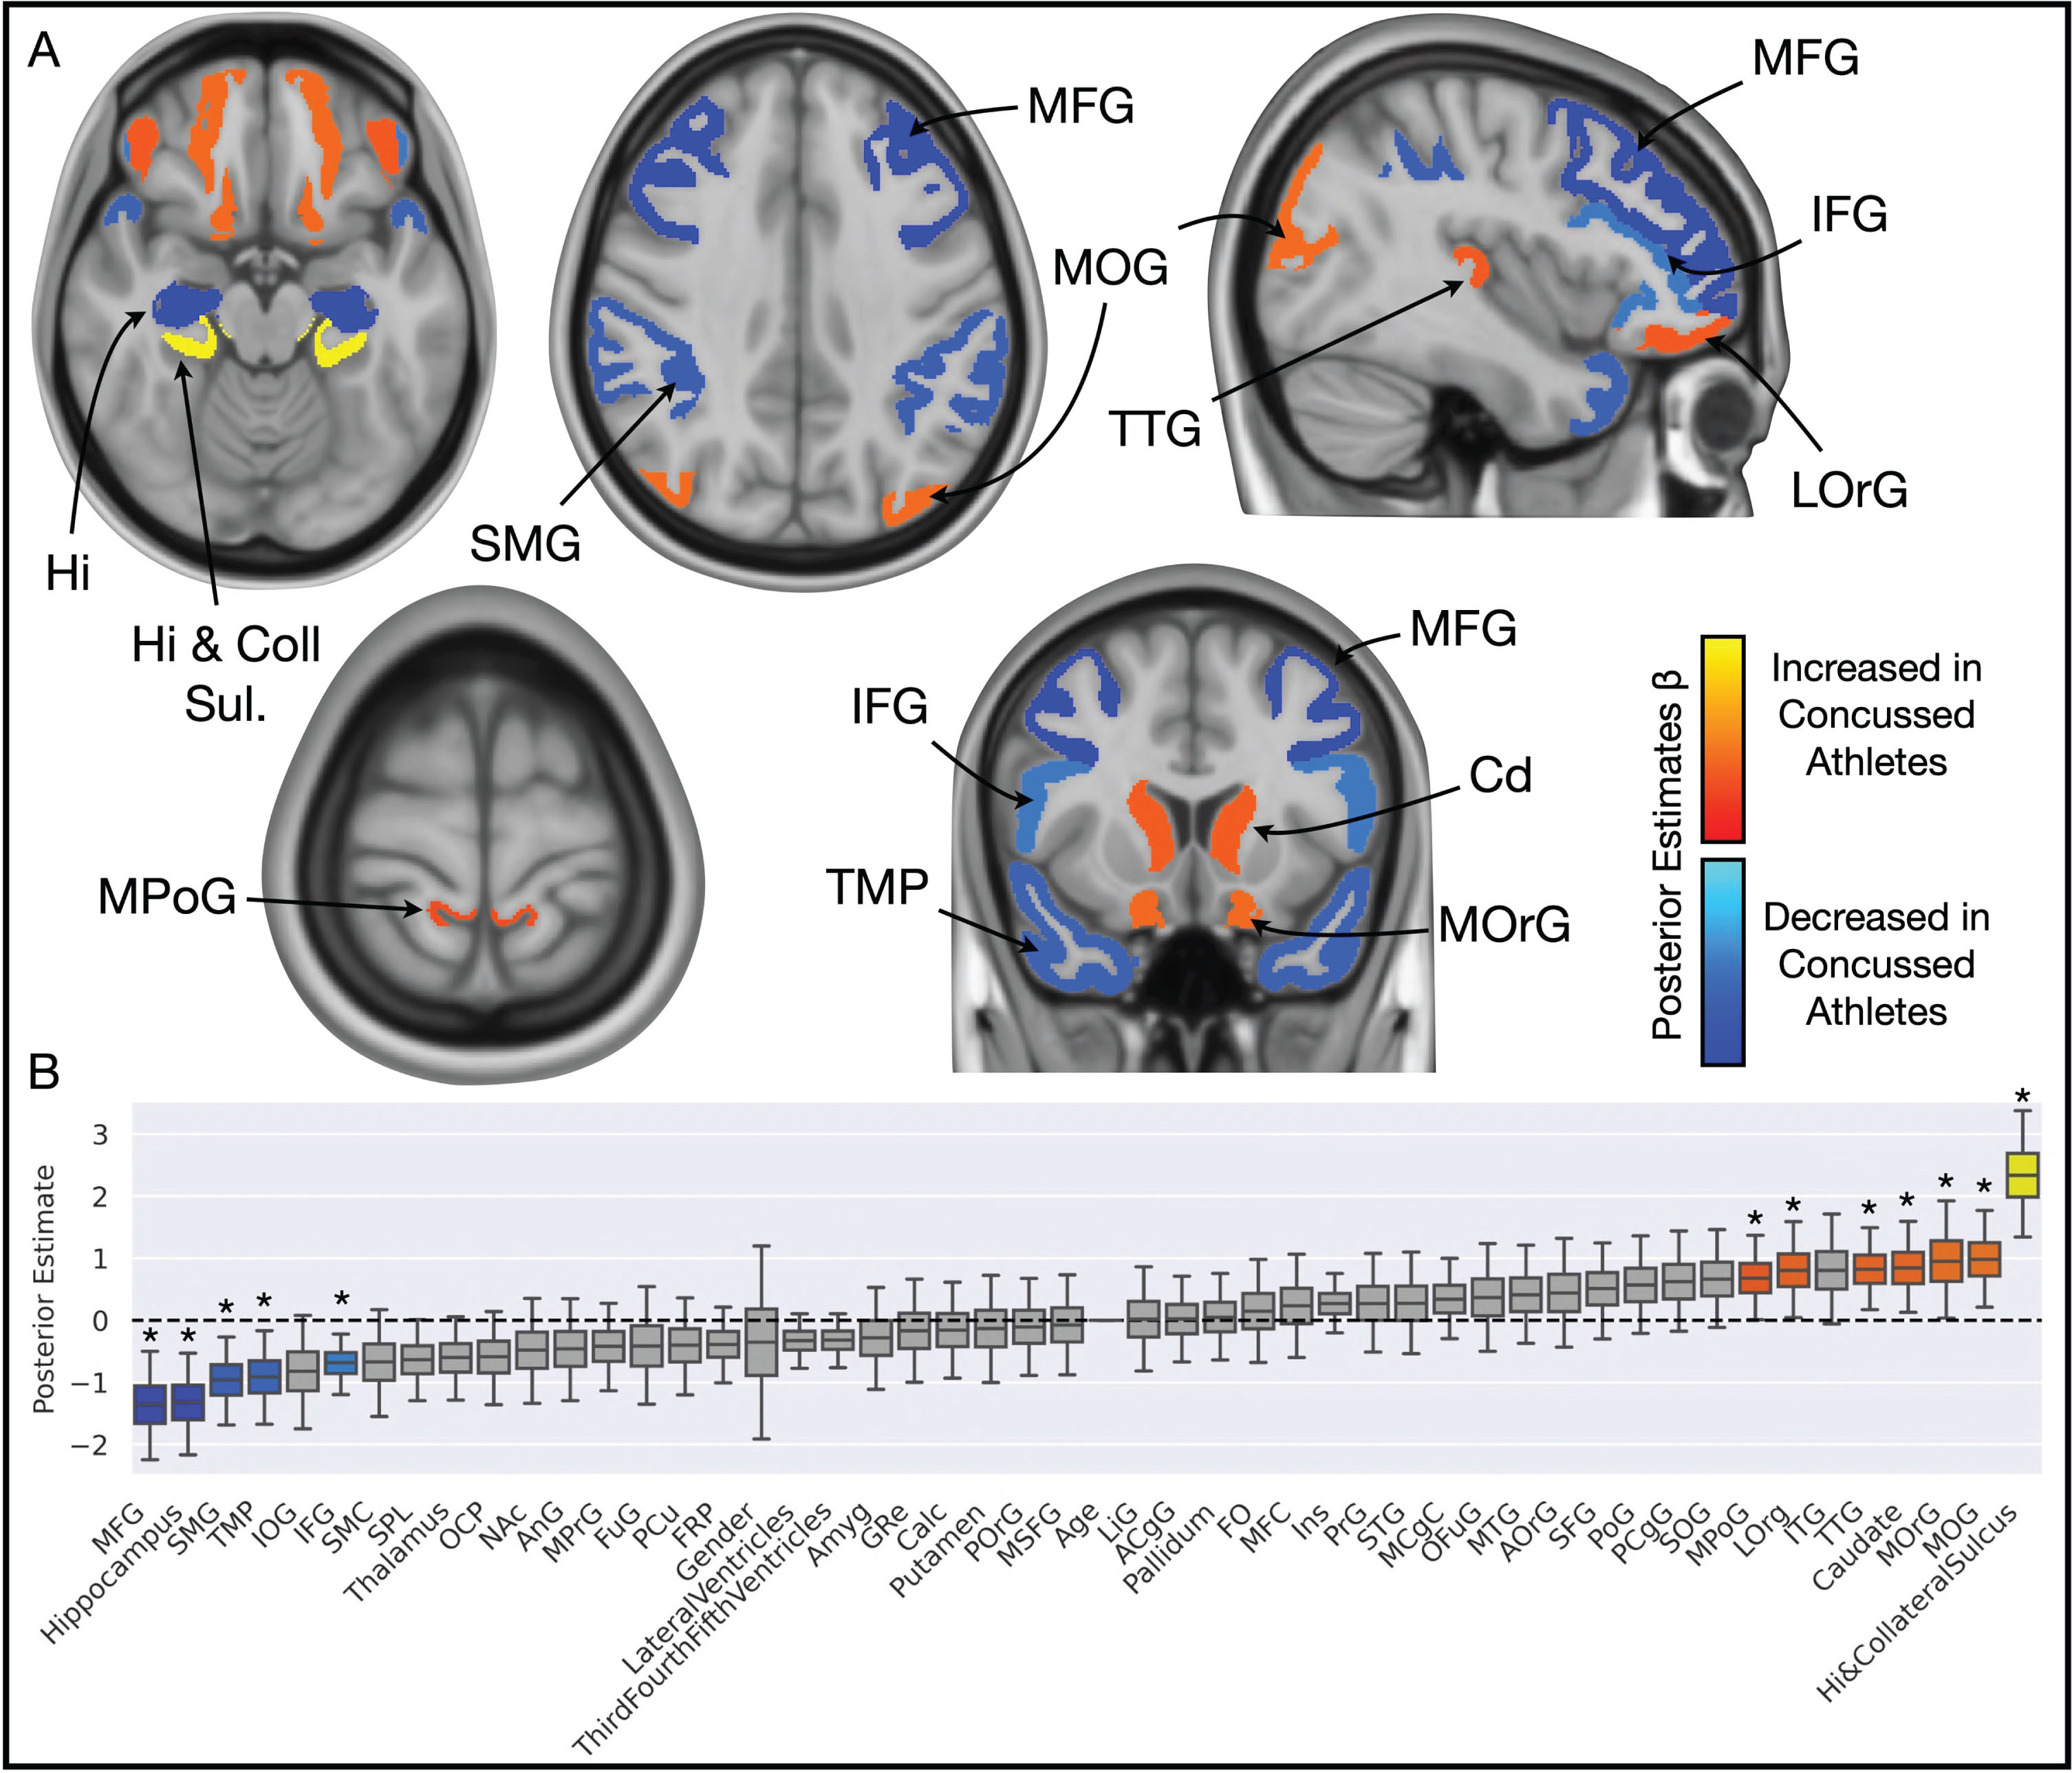 Grey matter volumetric differences across the cohort. A) Brain slices and B) boxplot illustrate color-coded posterior estimates of betas from Bayesian logit, wherein red-orange-yellow regions are those found to increase in volume in the athlete group, compared to the controls; reciprocally, blue and light blue regions are those found to decrease in volume in the athlete group, compared to the controls. Only significant regions are shown on the brain images, and the color is also aligned to the boxplot. Amyg, amygdala; ACgG, anterior cingulate gyrus; AOrG, anterior orbital gyrus; AnG, angular gyrus; Calc, calcarine cortex; FO, frontal operculum; FRP, frontal pole; FuG, occipital fusiform gyrus; GRe, gyrus rectus; Hi, hippocampal [sulcus]; Ins, insula; IFG, inferior frontal gyrus; IOG, inferior occipital gyrus; ITG, inferior temporal gyrus; LiG, lingual gyrus; LOrg, lateral orbital gyrus; MCgG, middle cingulate gyrus; MFC, medial frontal cortex; MFG, middle frontal gyrus; MOG, middle occipital gyrus; MOrG, medial orbital gyrus; MPoG, postcentral gyrus medial segment; MPrG, precentral gyrus medial segment; MSFG, superior frontal gyrus medial segment; MTG, middle temporal gyrus; NAc, nucleus accumbens; OCP, occipital pole; OFuG, occipital fusiform gyrus; PCgG, posterior cingulate gyrus; PCu, precuneus; PoG, postcentral gyrus; POrG, posterior orbital gyrus; PrG, precentral gyrus; SFG, superior frontal gyrus; SMC, supplementary motor cortex; SMG, supramarginal gyrus; SOG, superior occipital gyrus; SPL, superior parietal lobule; STG, superior temporal gyrus; TMP, temporal pole; TTG, transverse temporal gyrus.